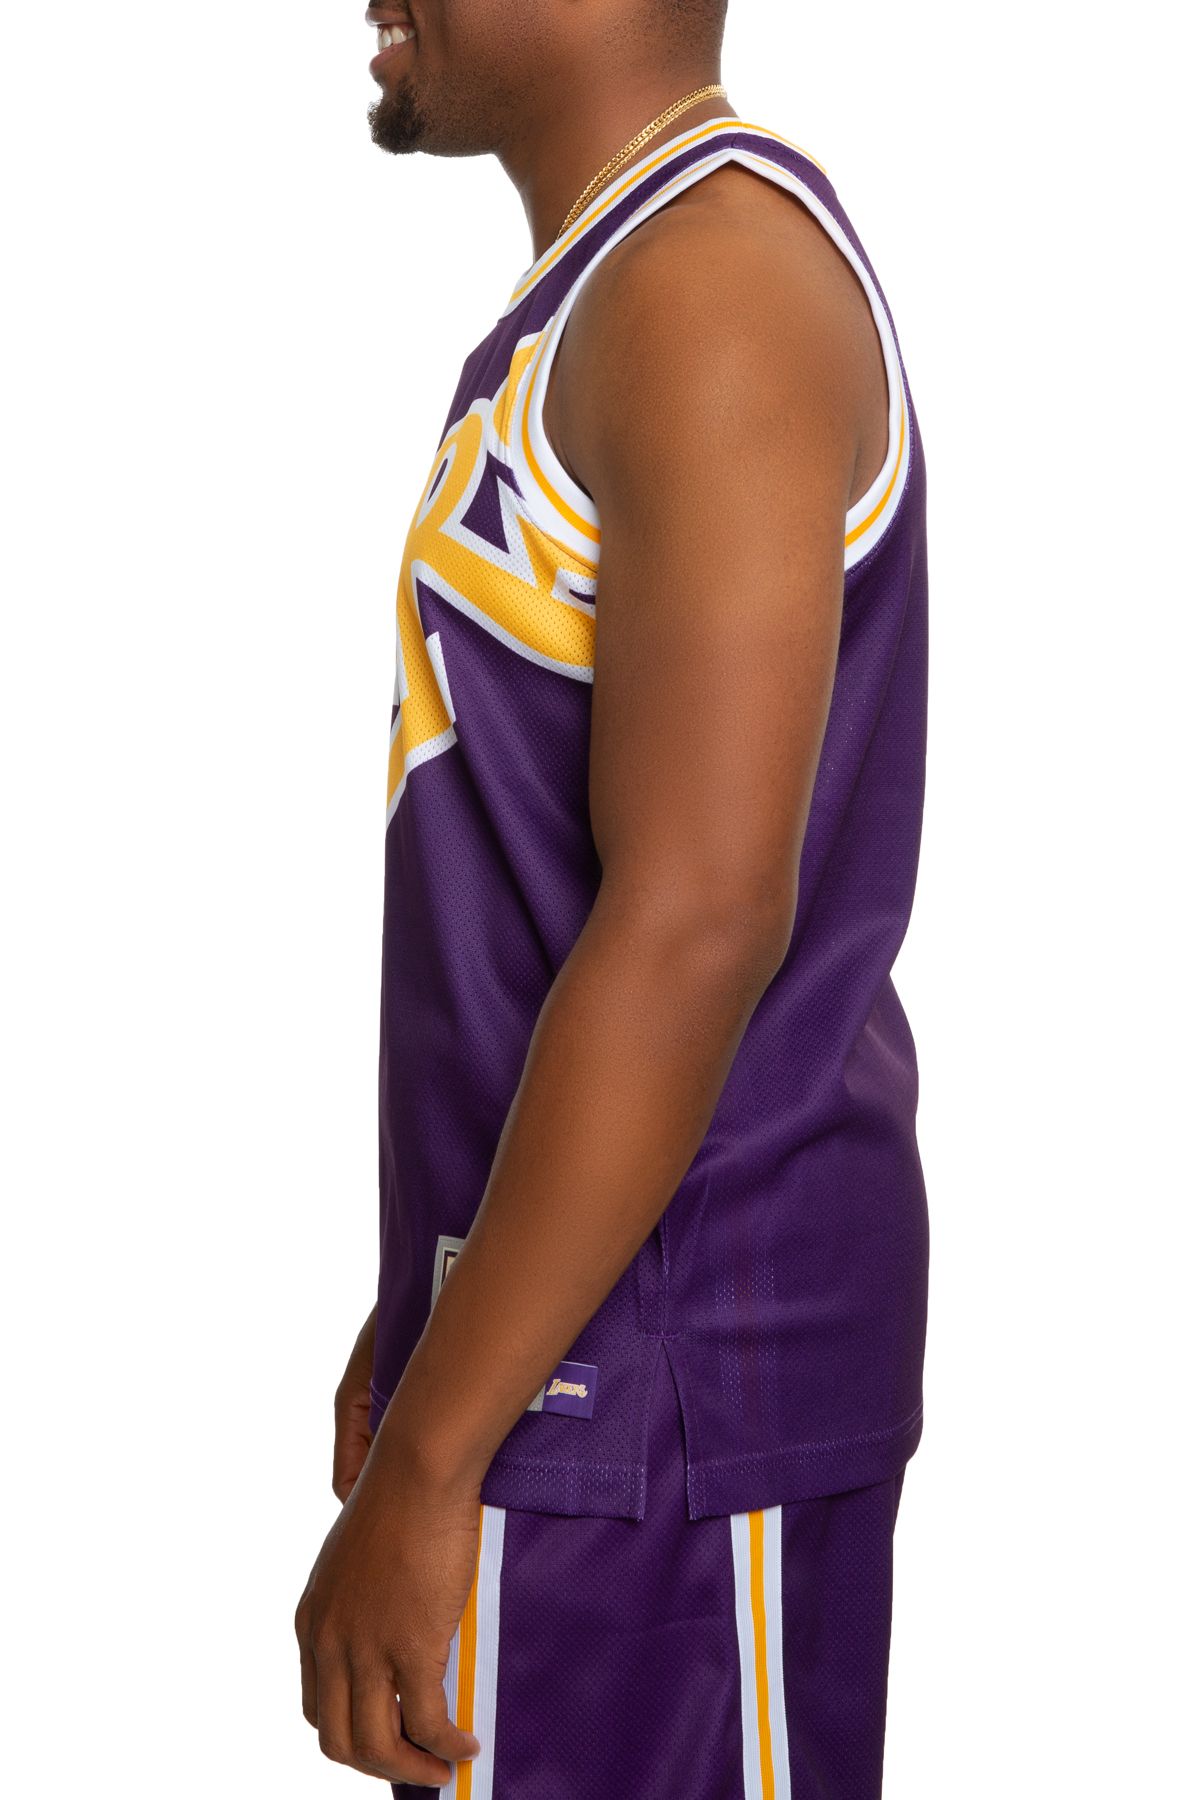 lakers big face jersey